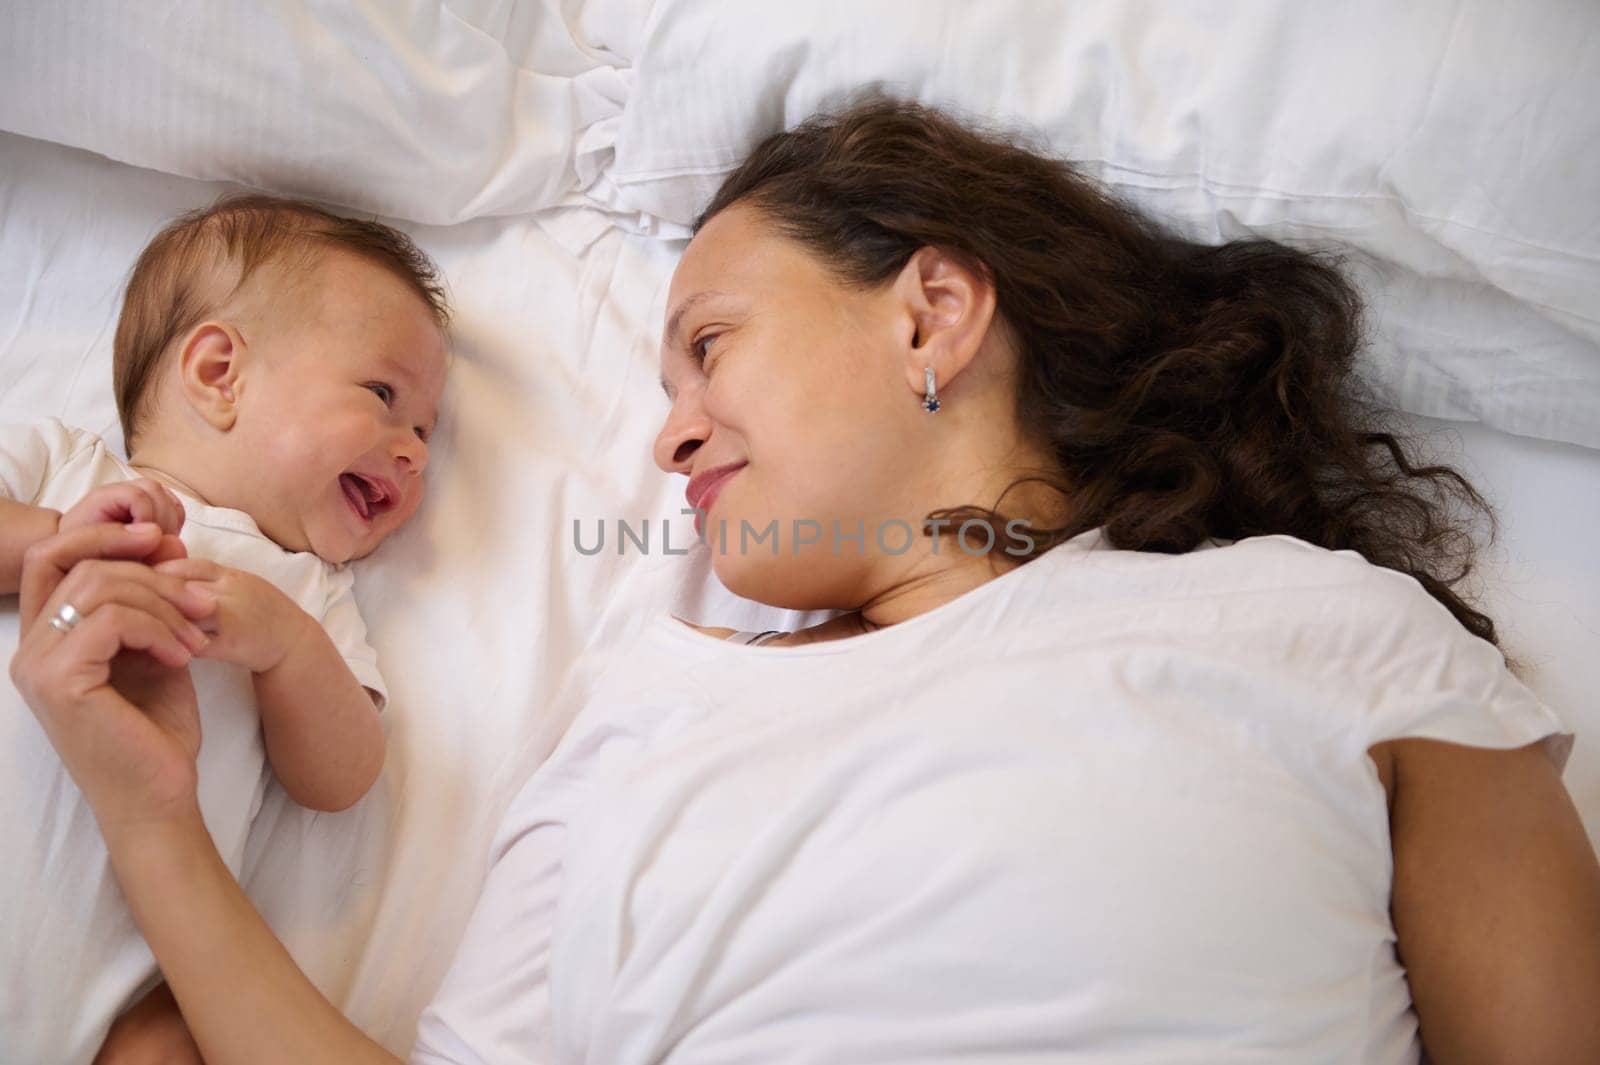 Delightful young mother lying on the bed with her adorable baby boy 4 months old. Mom and child communicating, smiling. The concept of happy maternity leave, babyhood, family relationships